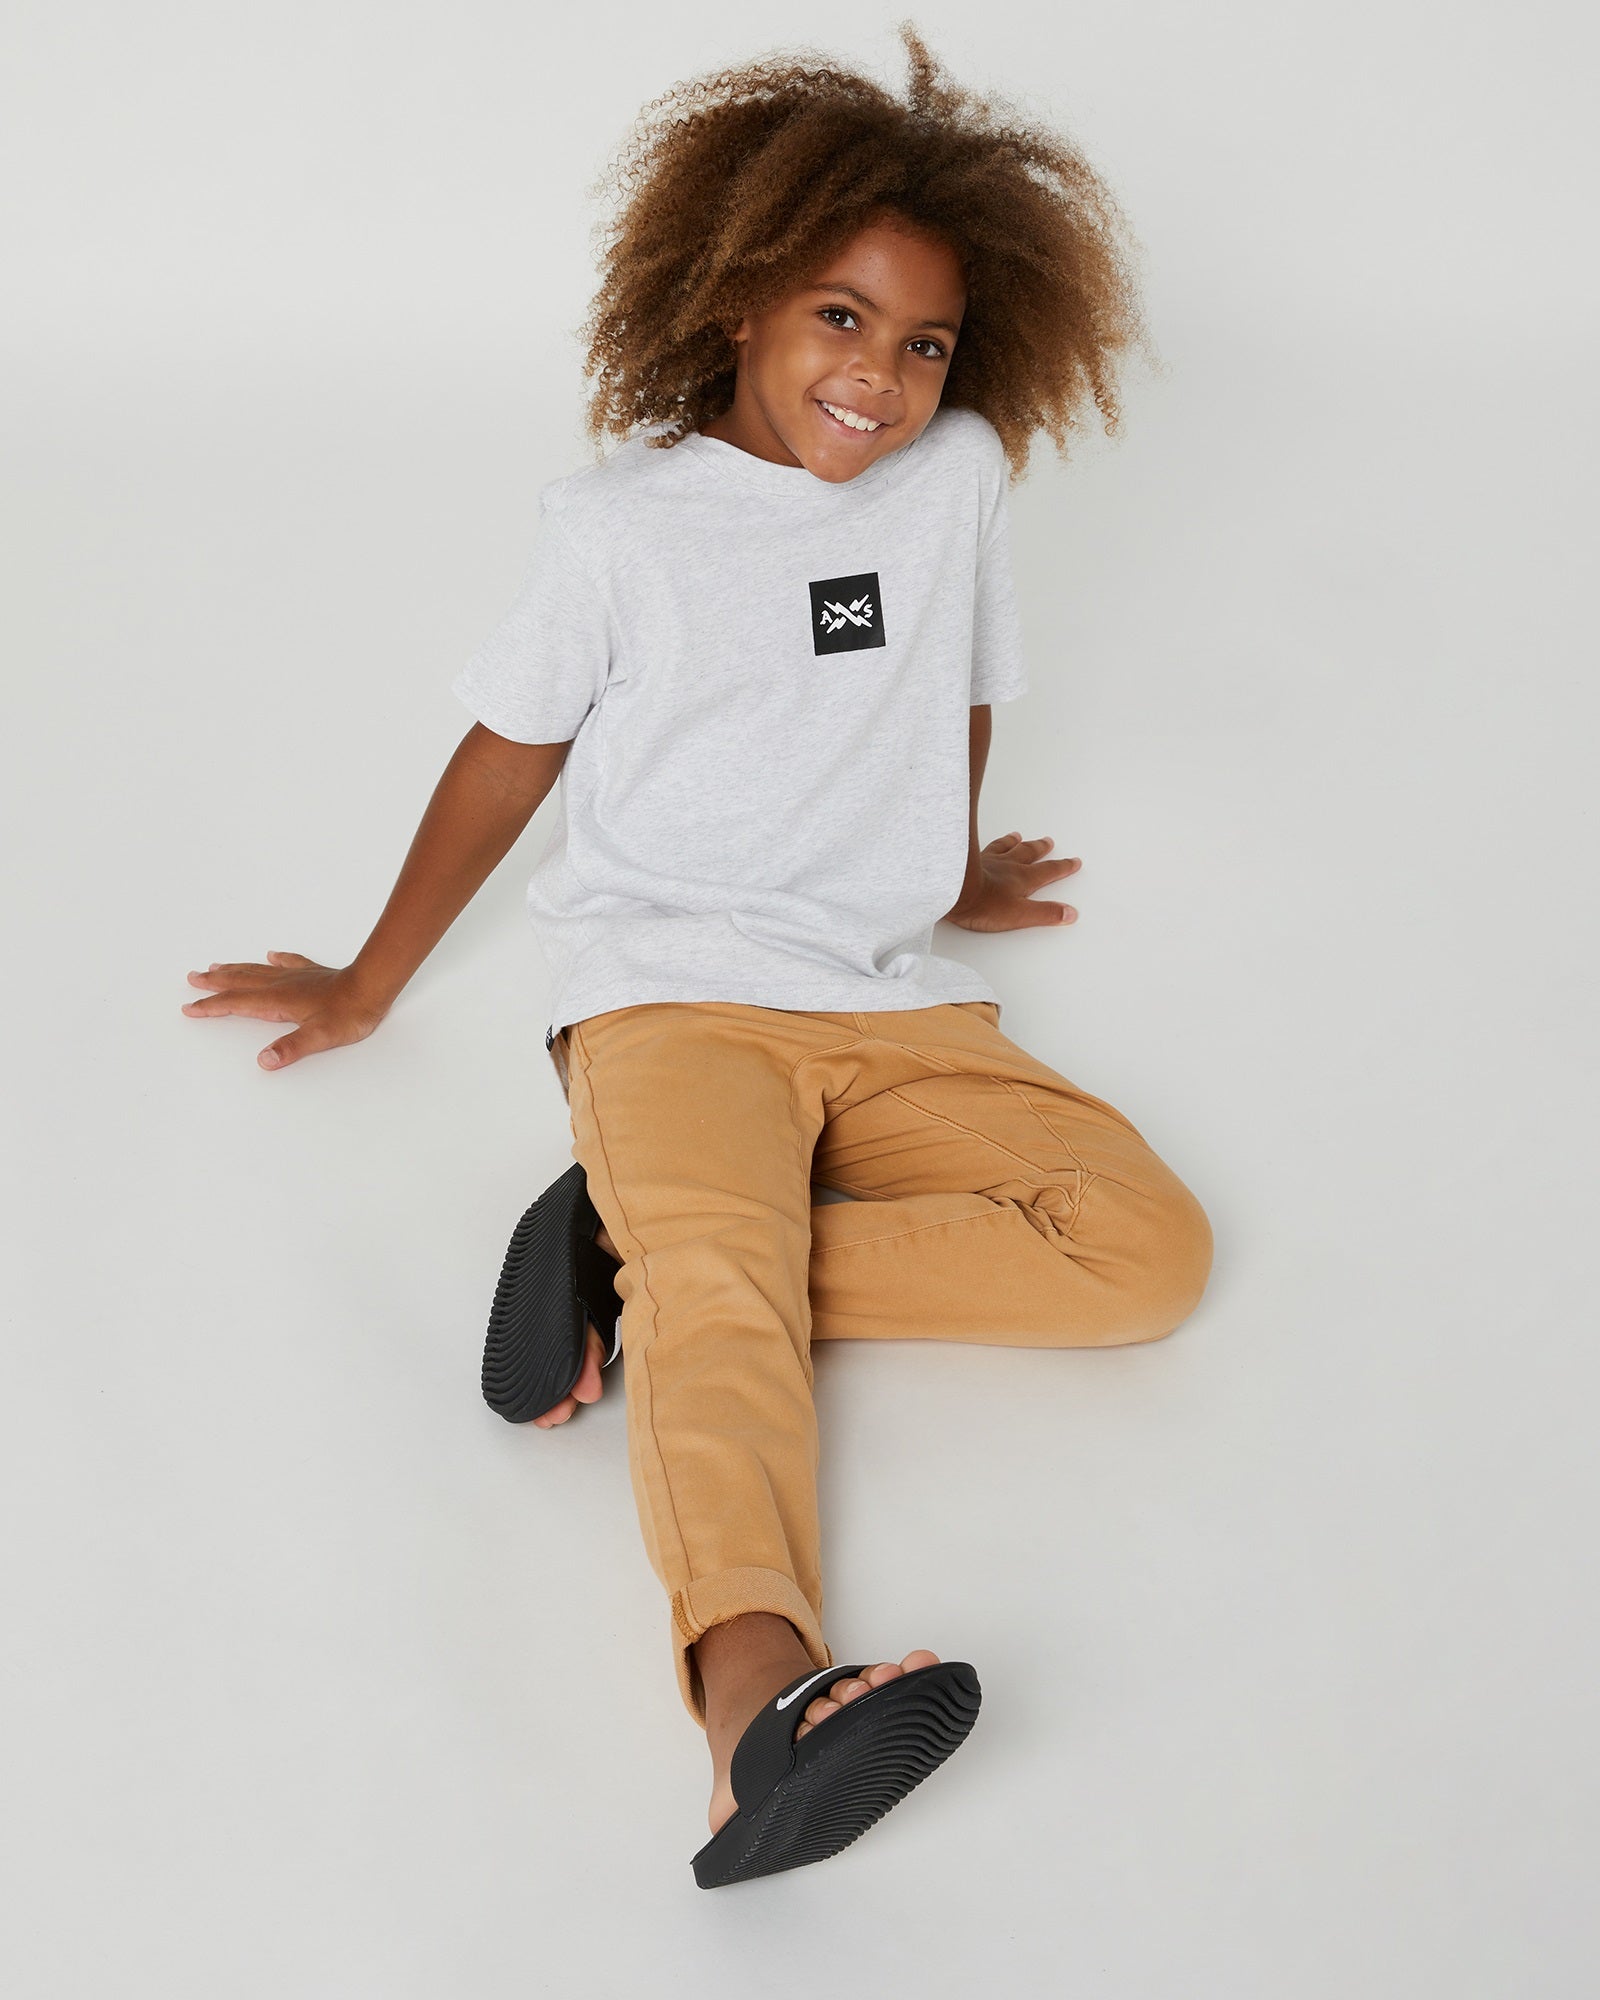 Alphabet Soup's Kids Chino Joggers in Washed Stone are perfect for stylish and comfy little groms. Made with a soft material, these joggers have an elastic waistband, cuffed hem, and back pockets.